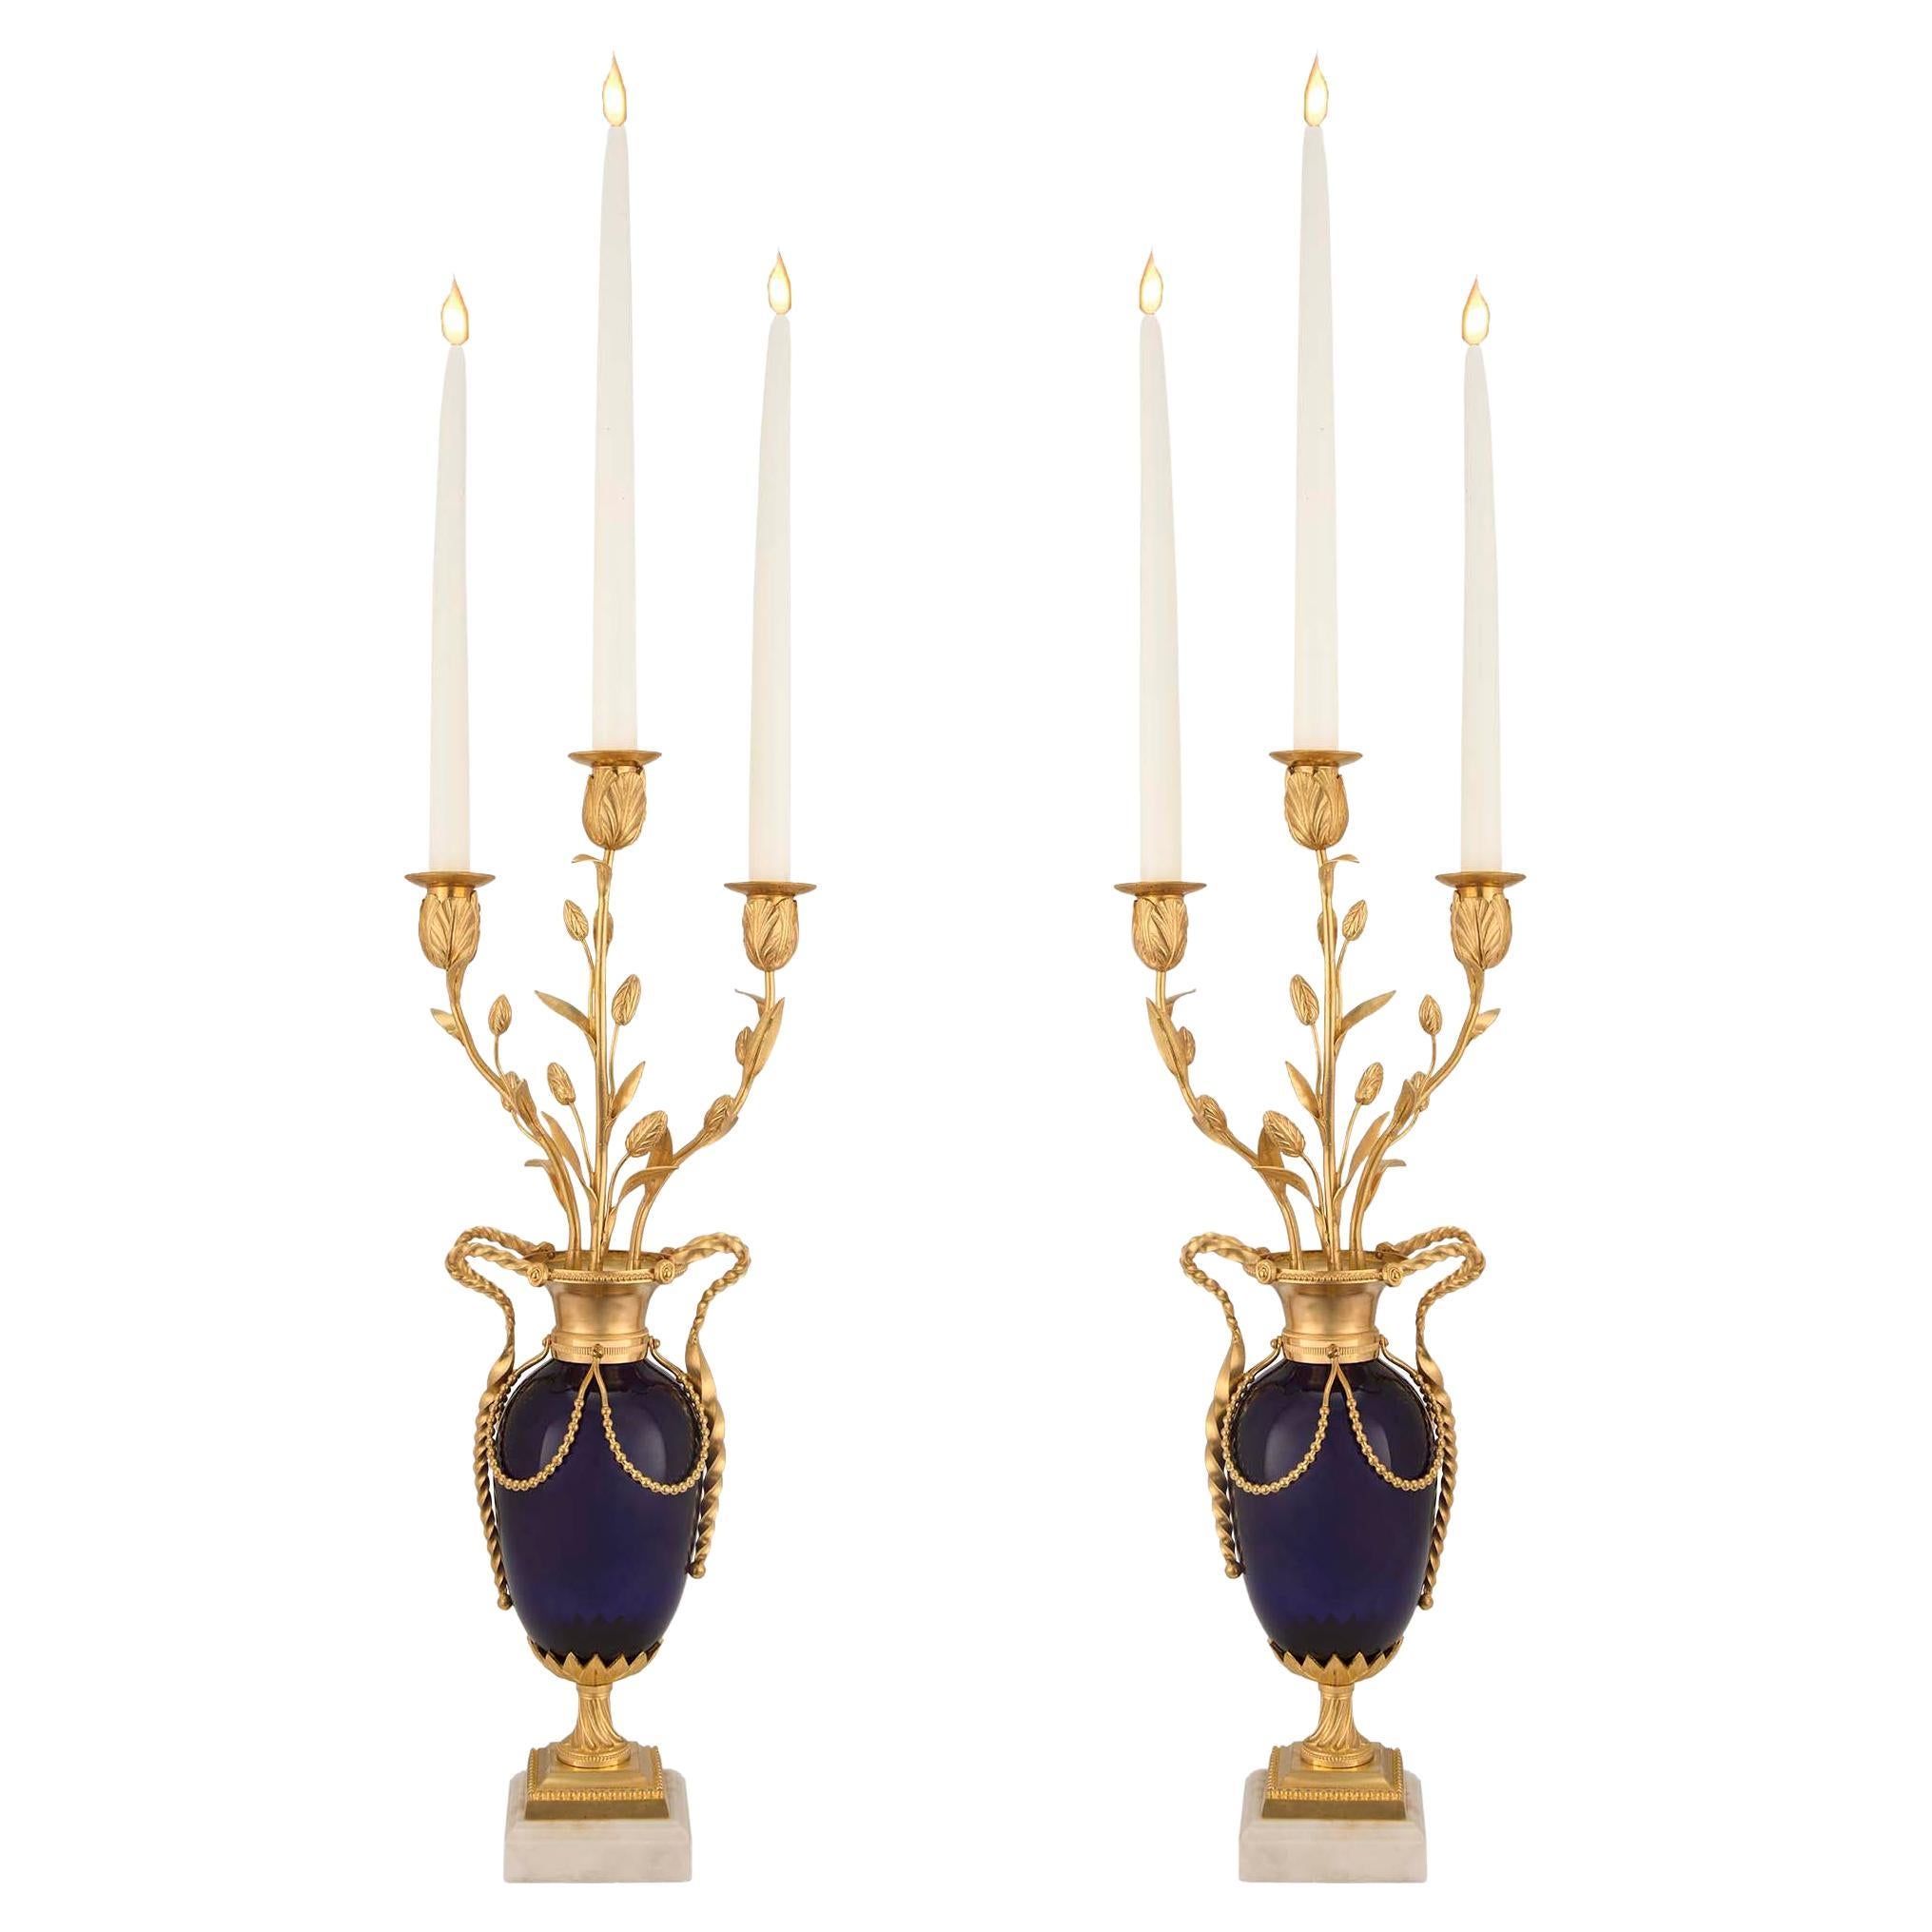 French 19th Century Louis XVI Style Cobalt Blue Glass and Ormolu Candelabras For Sale